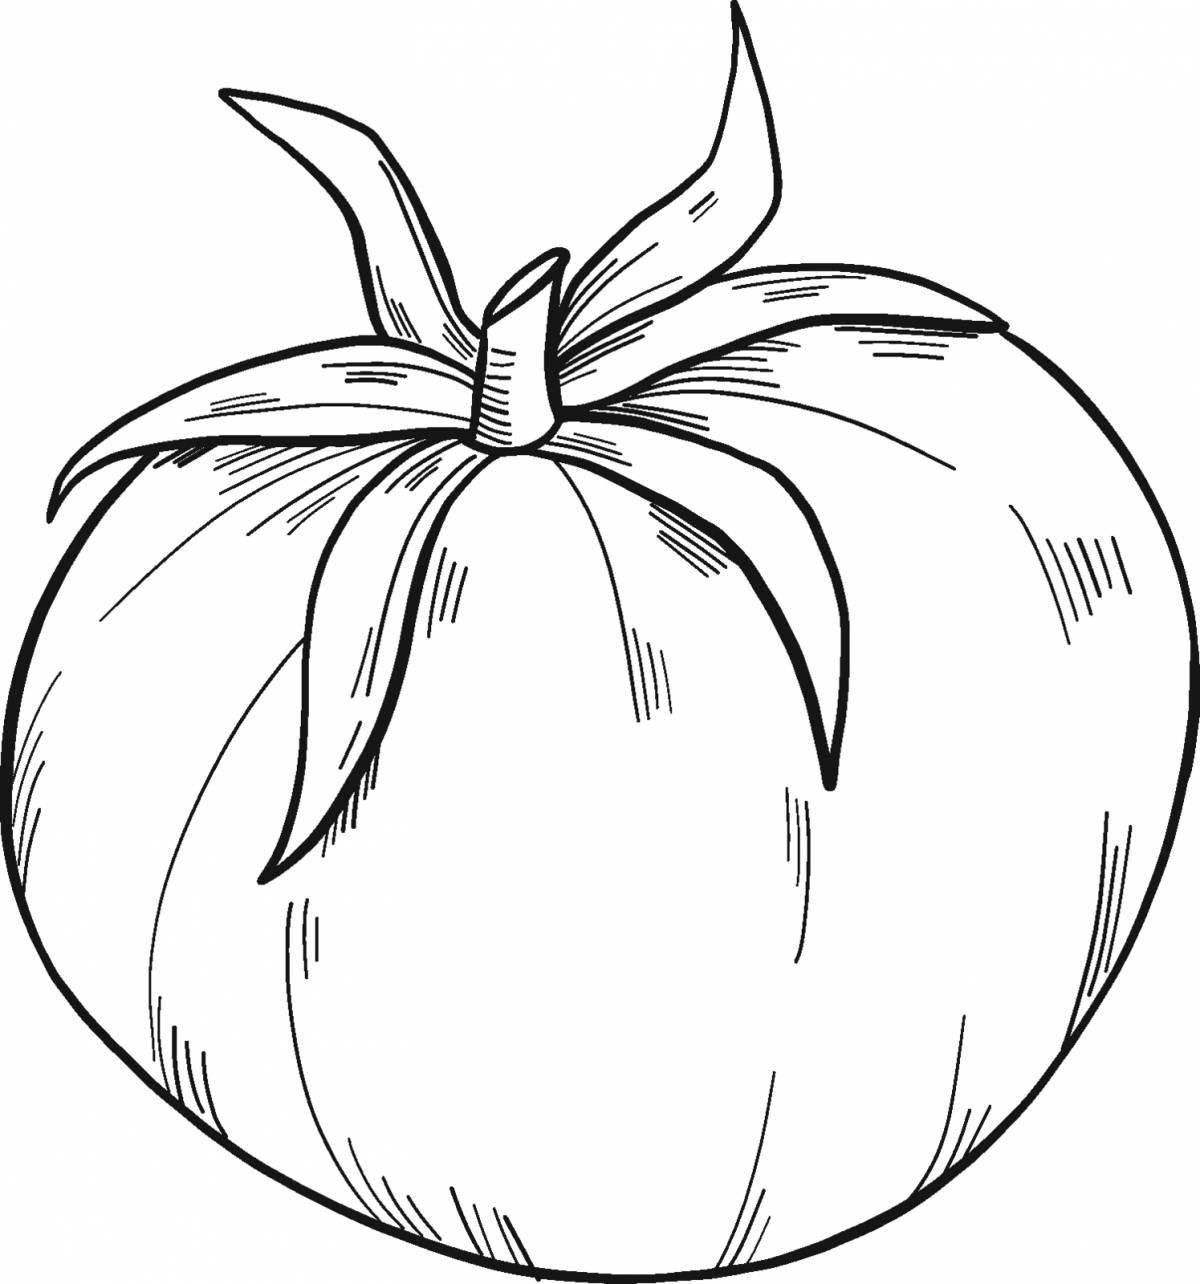 A fun tomato coloring book for 3-4 year olds